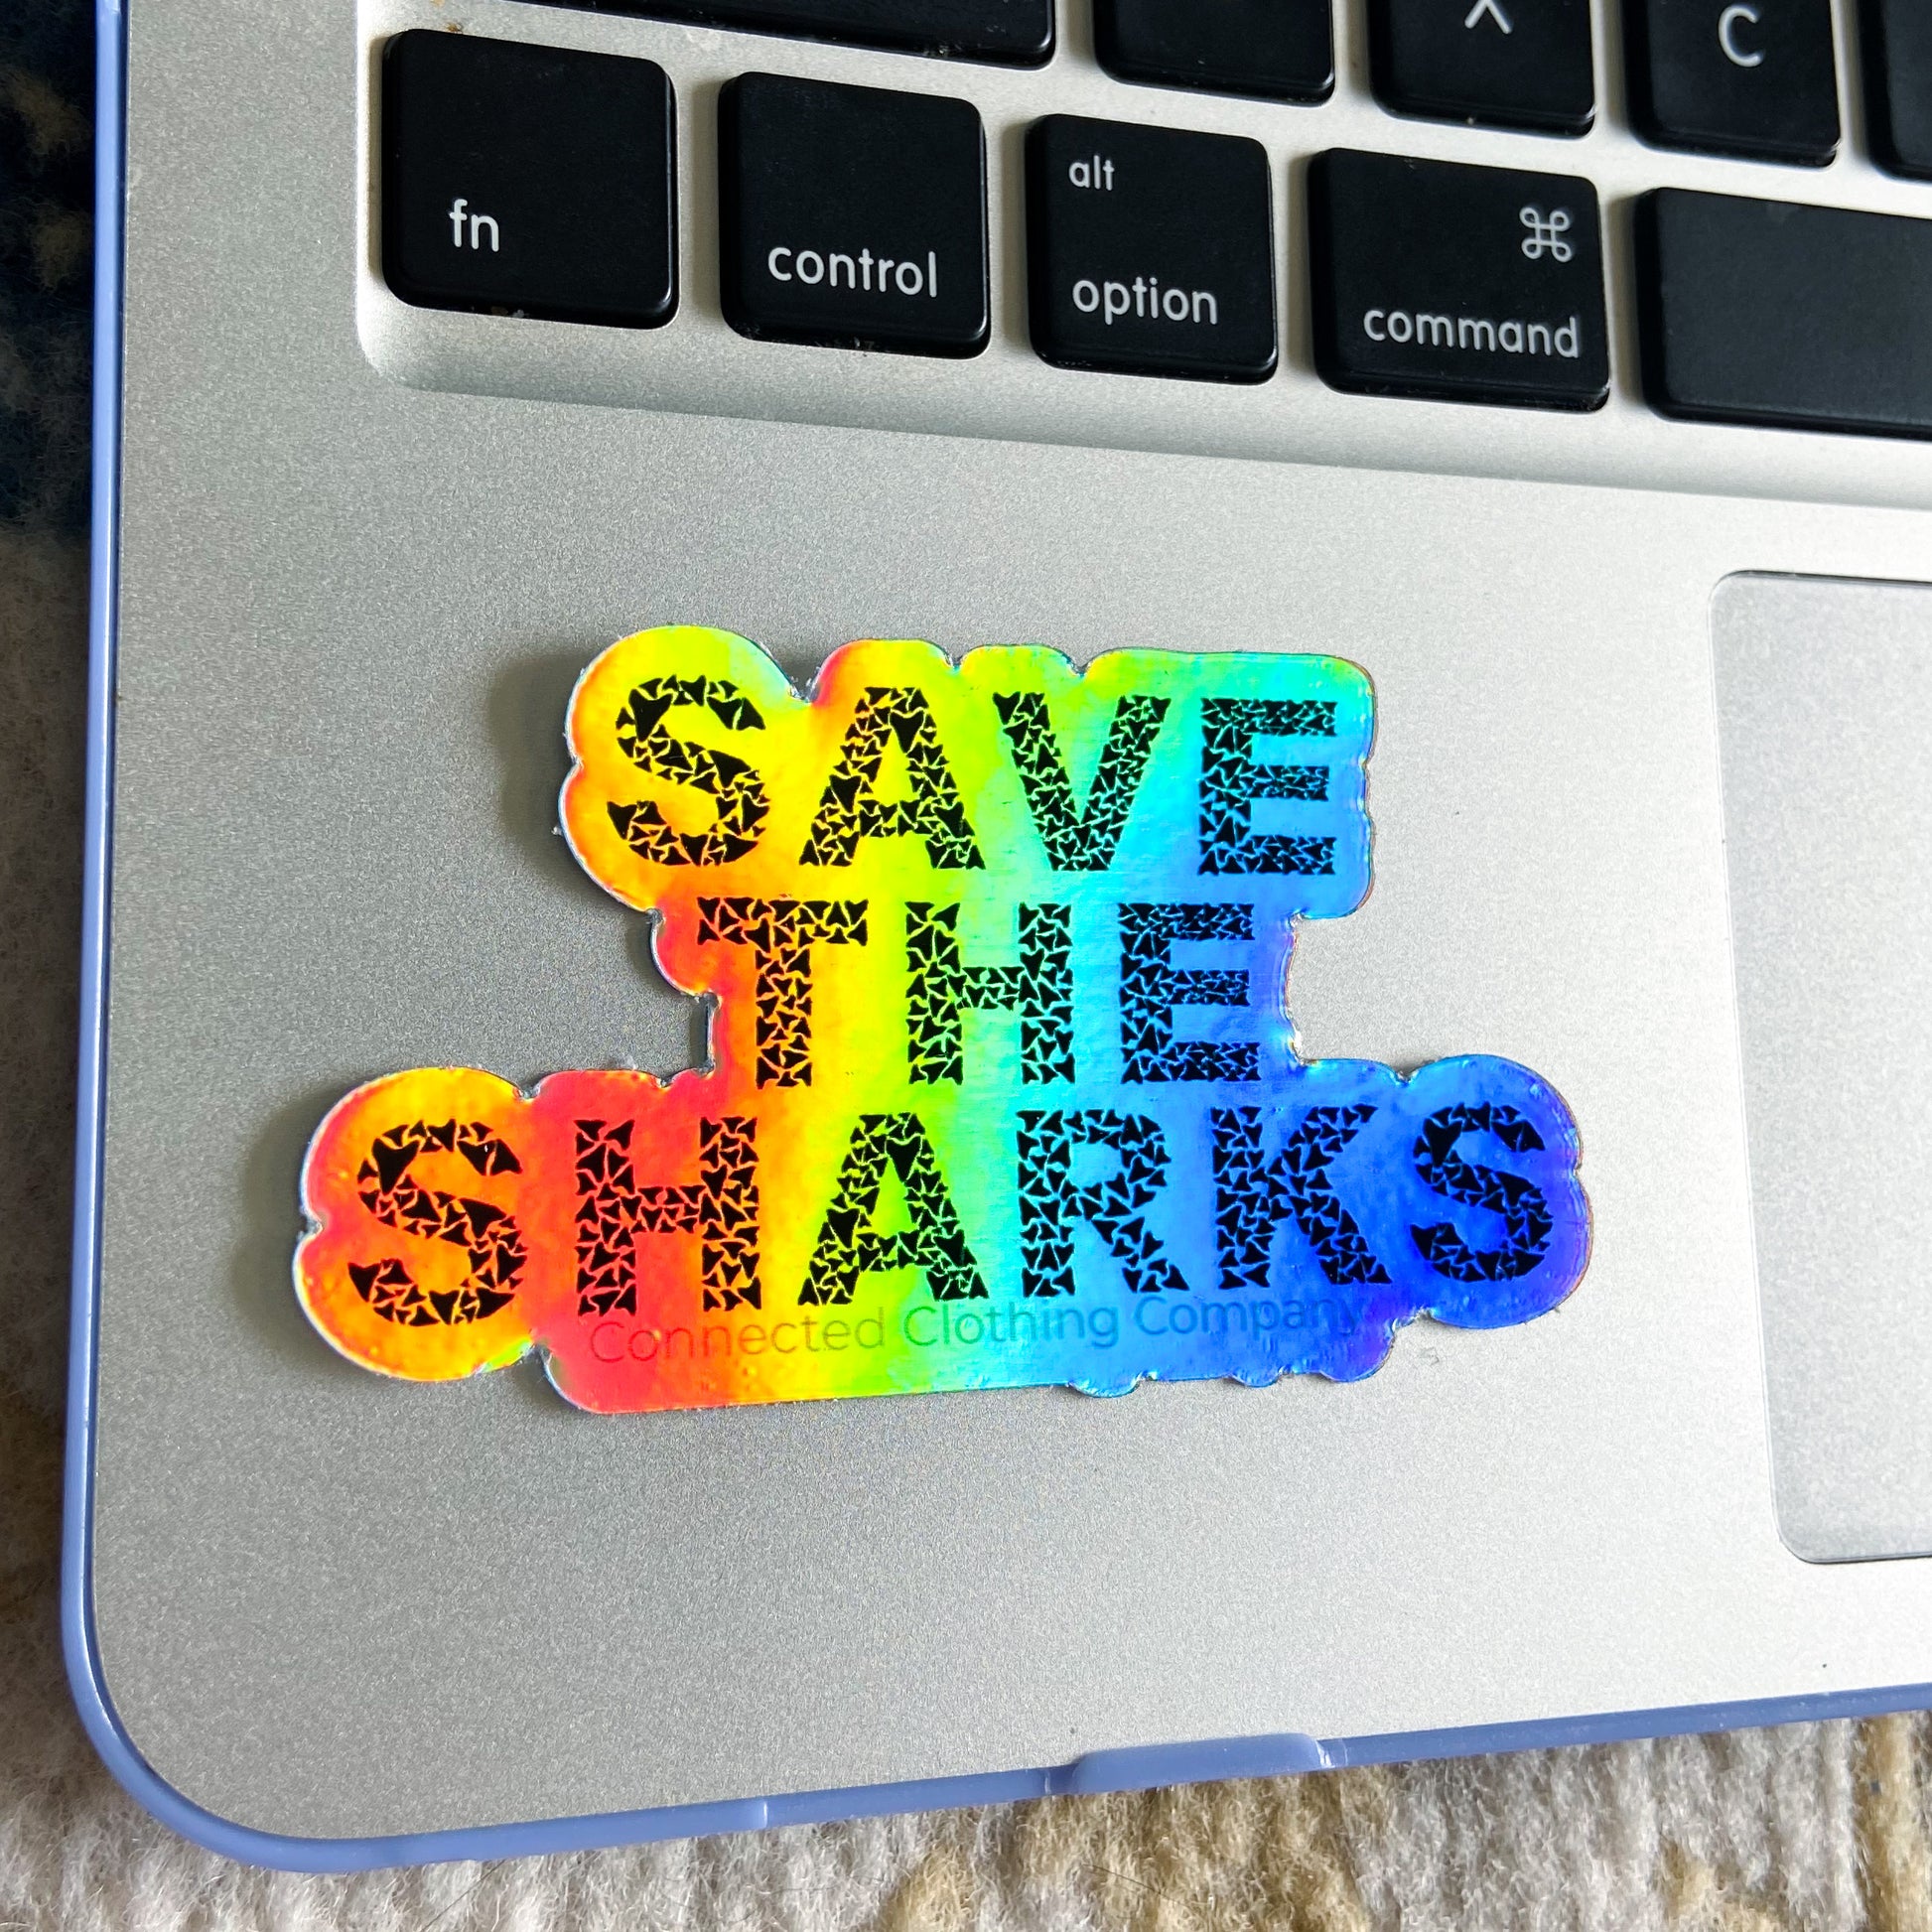 Holographic Save The Sharks Sticker - sweetsherriloudesigns - 10% of profits donated to Oceana shark conservation